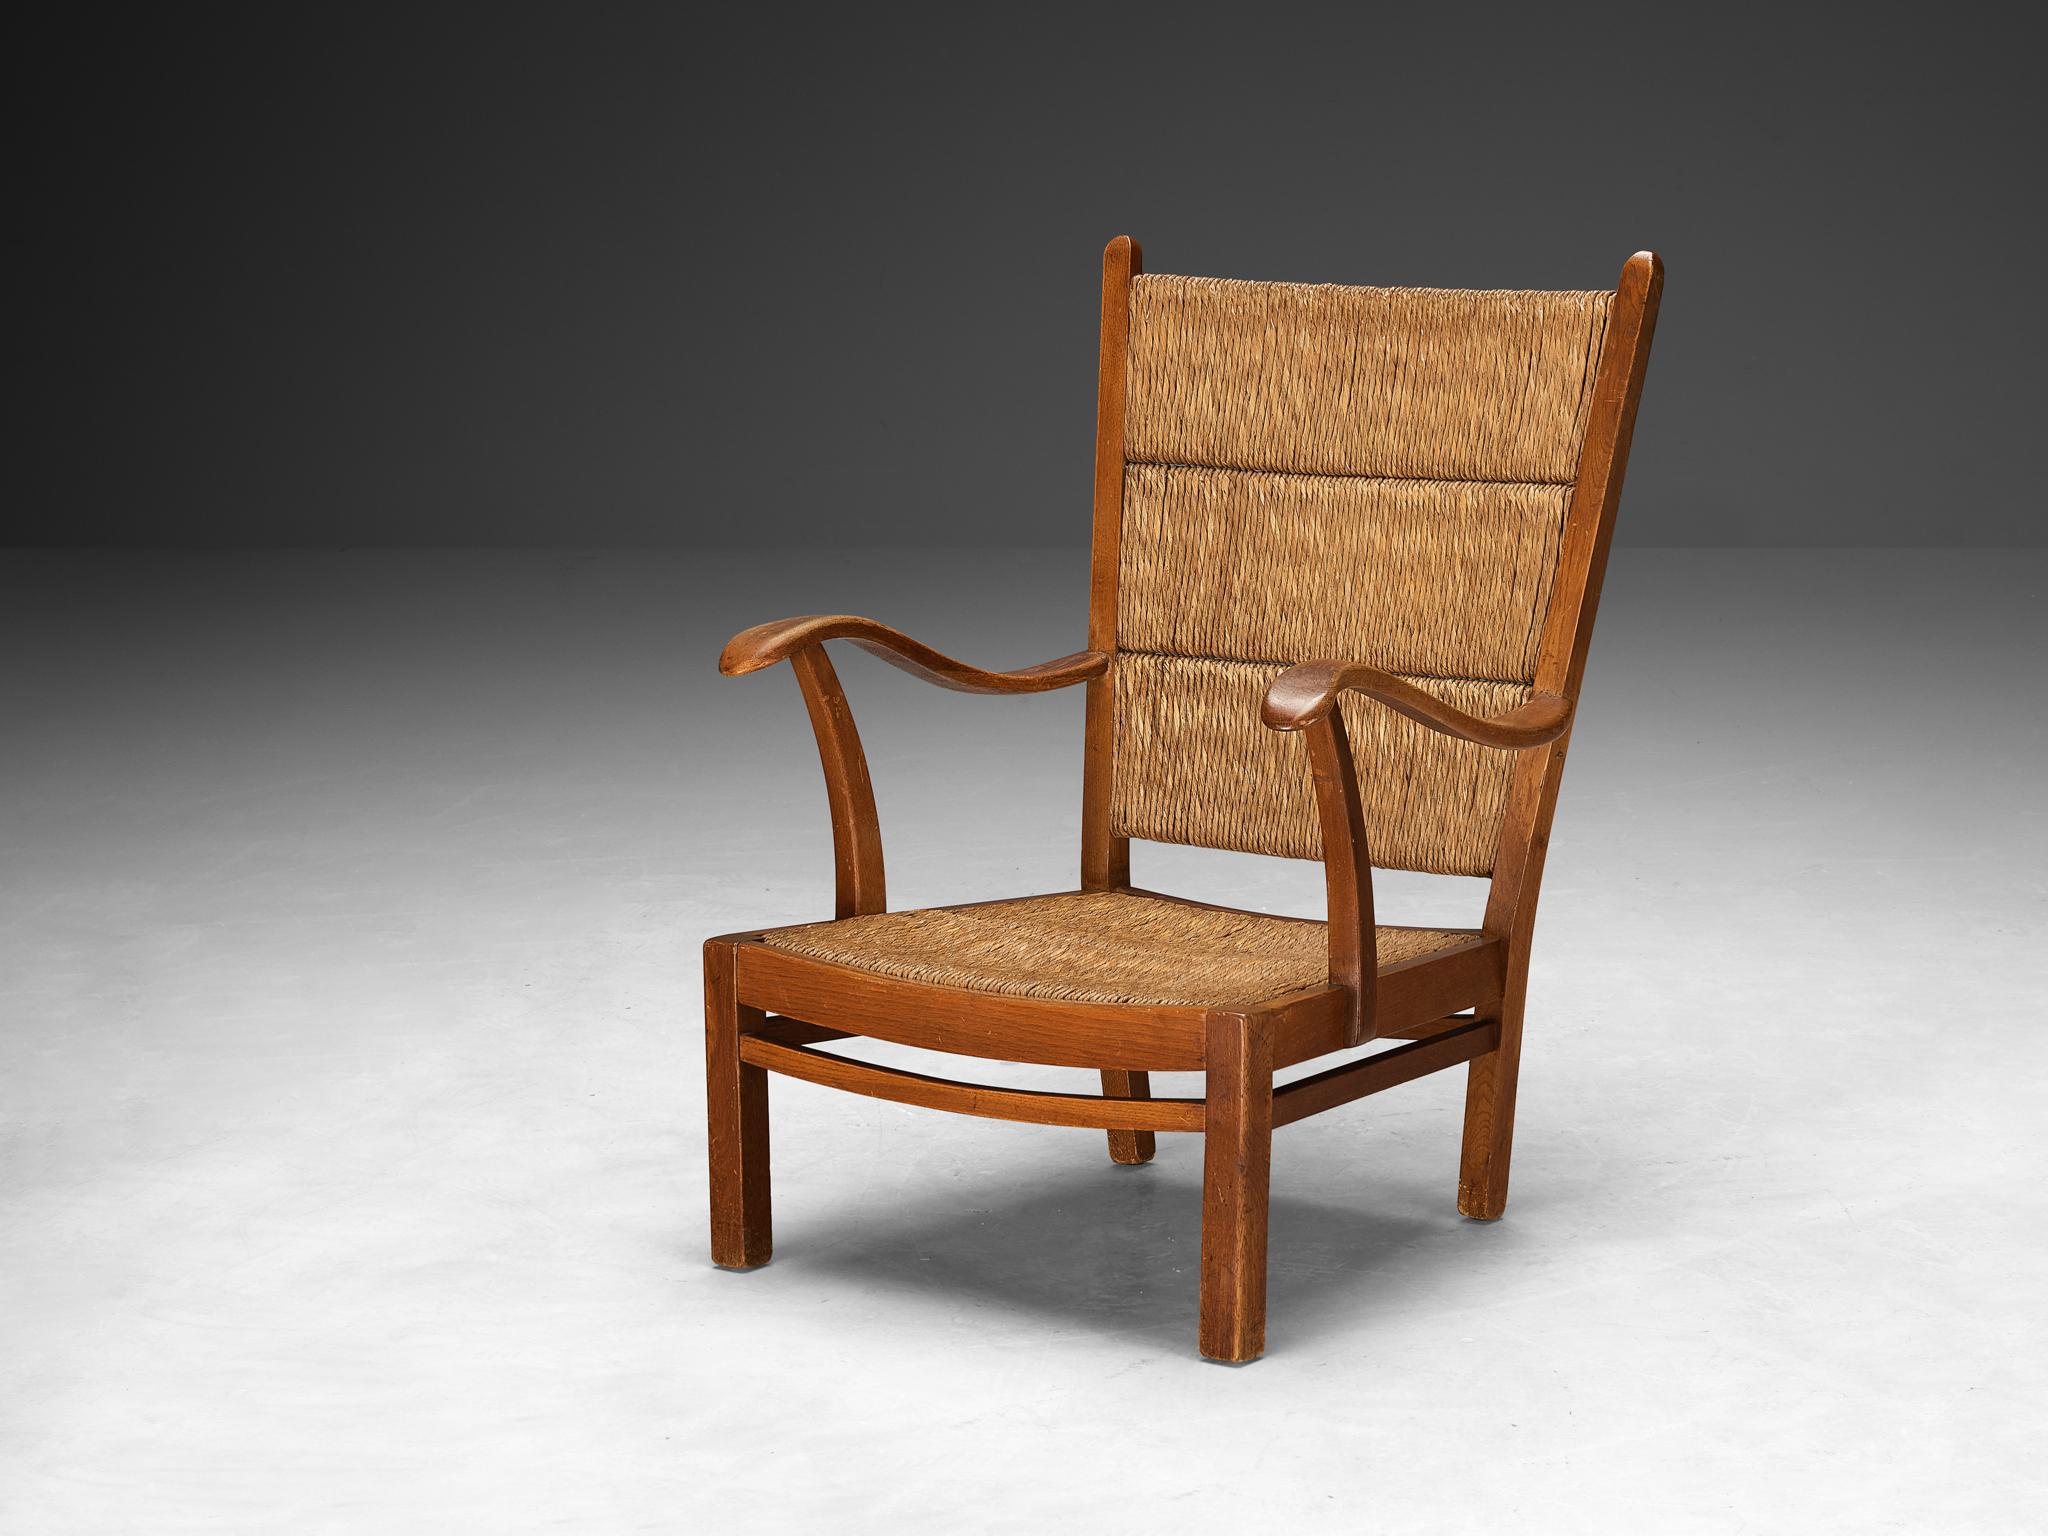 Armchair, straw, stained beech, The Netherlands, 1950s

This rustic armchair originates from The Netherlands and epitomizes an exquisite simplicity of remarkable quality. The straw backrest is made in three parts and shows horizontal openings that